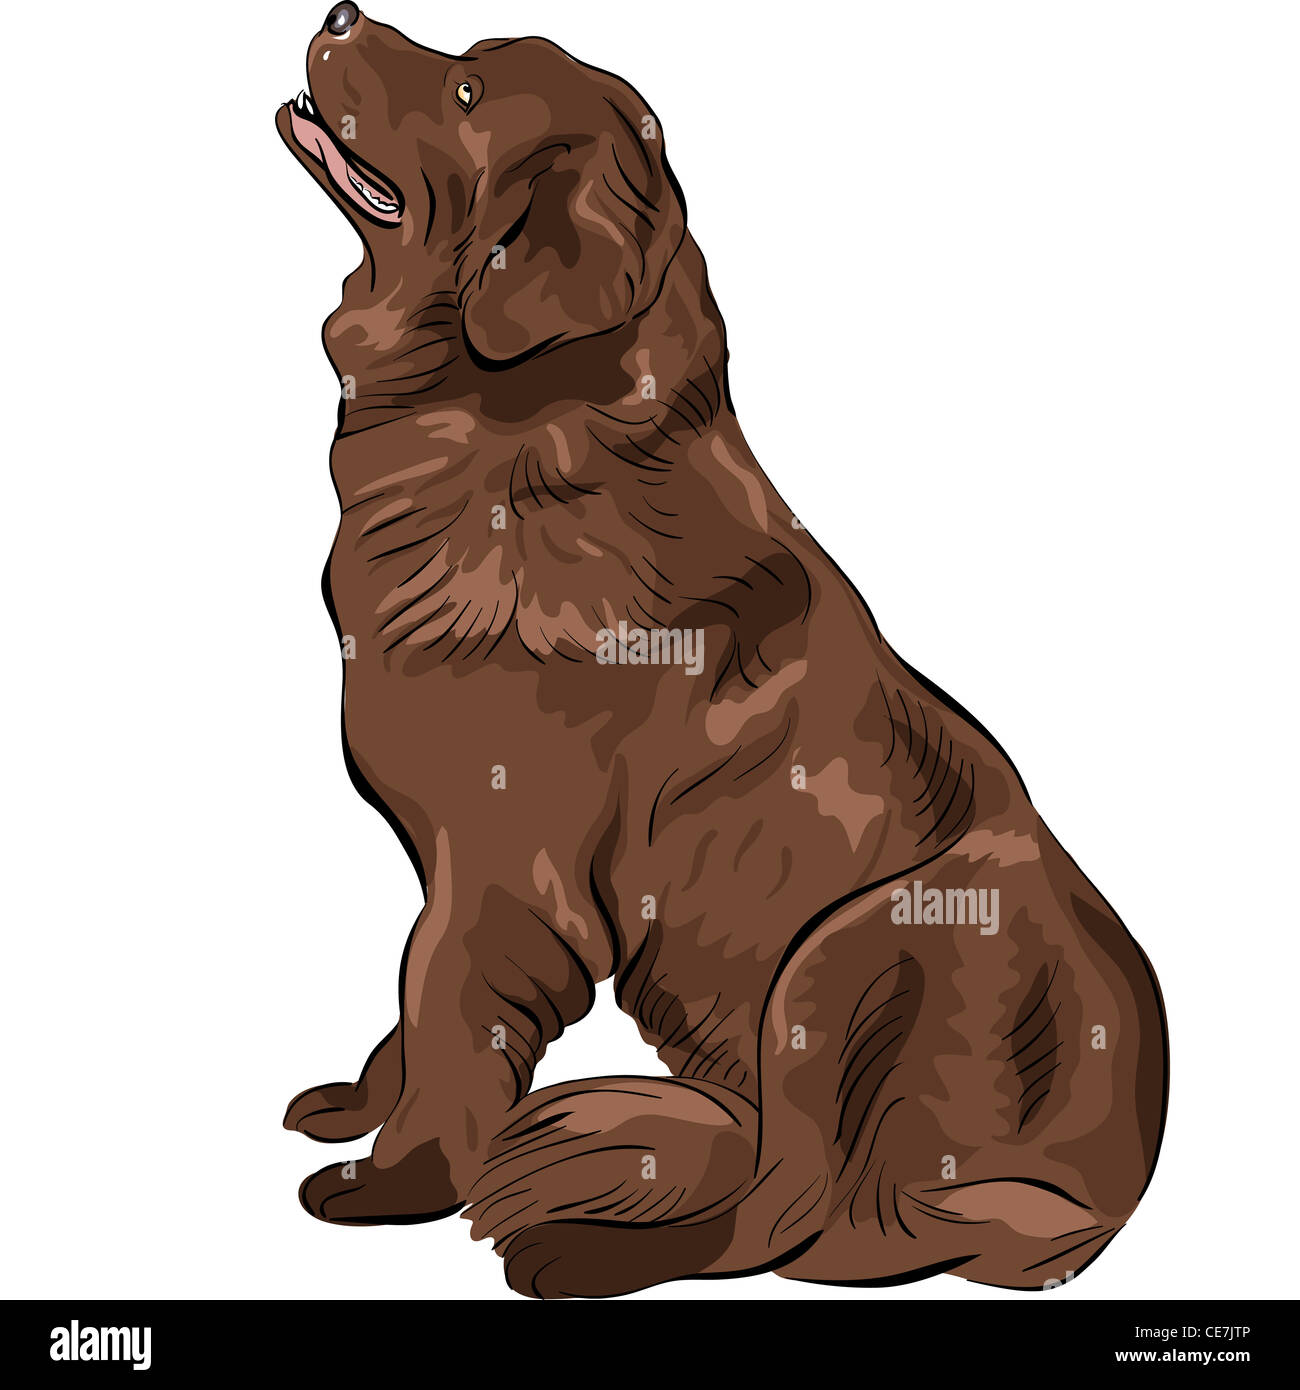 color sketch of the dog Newfoundland hound breed sitting Stock Photo